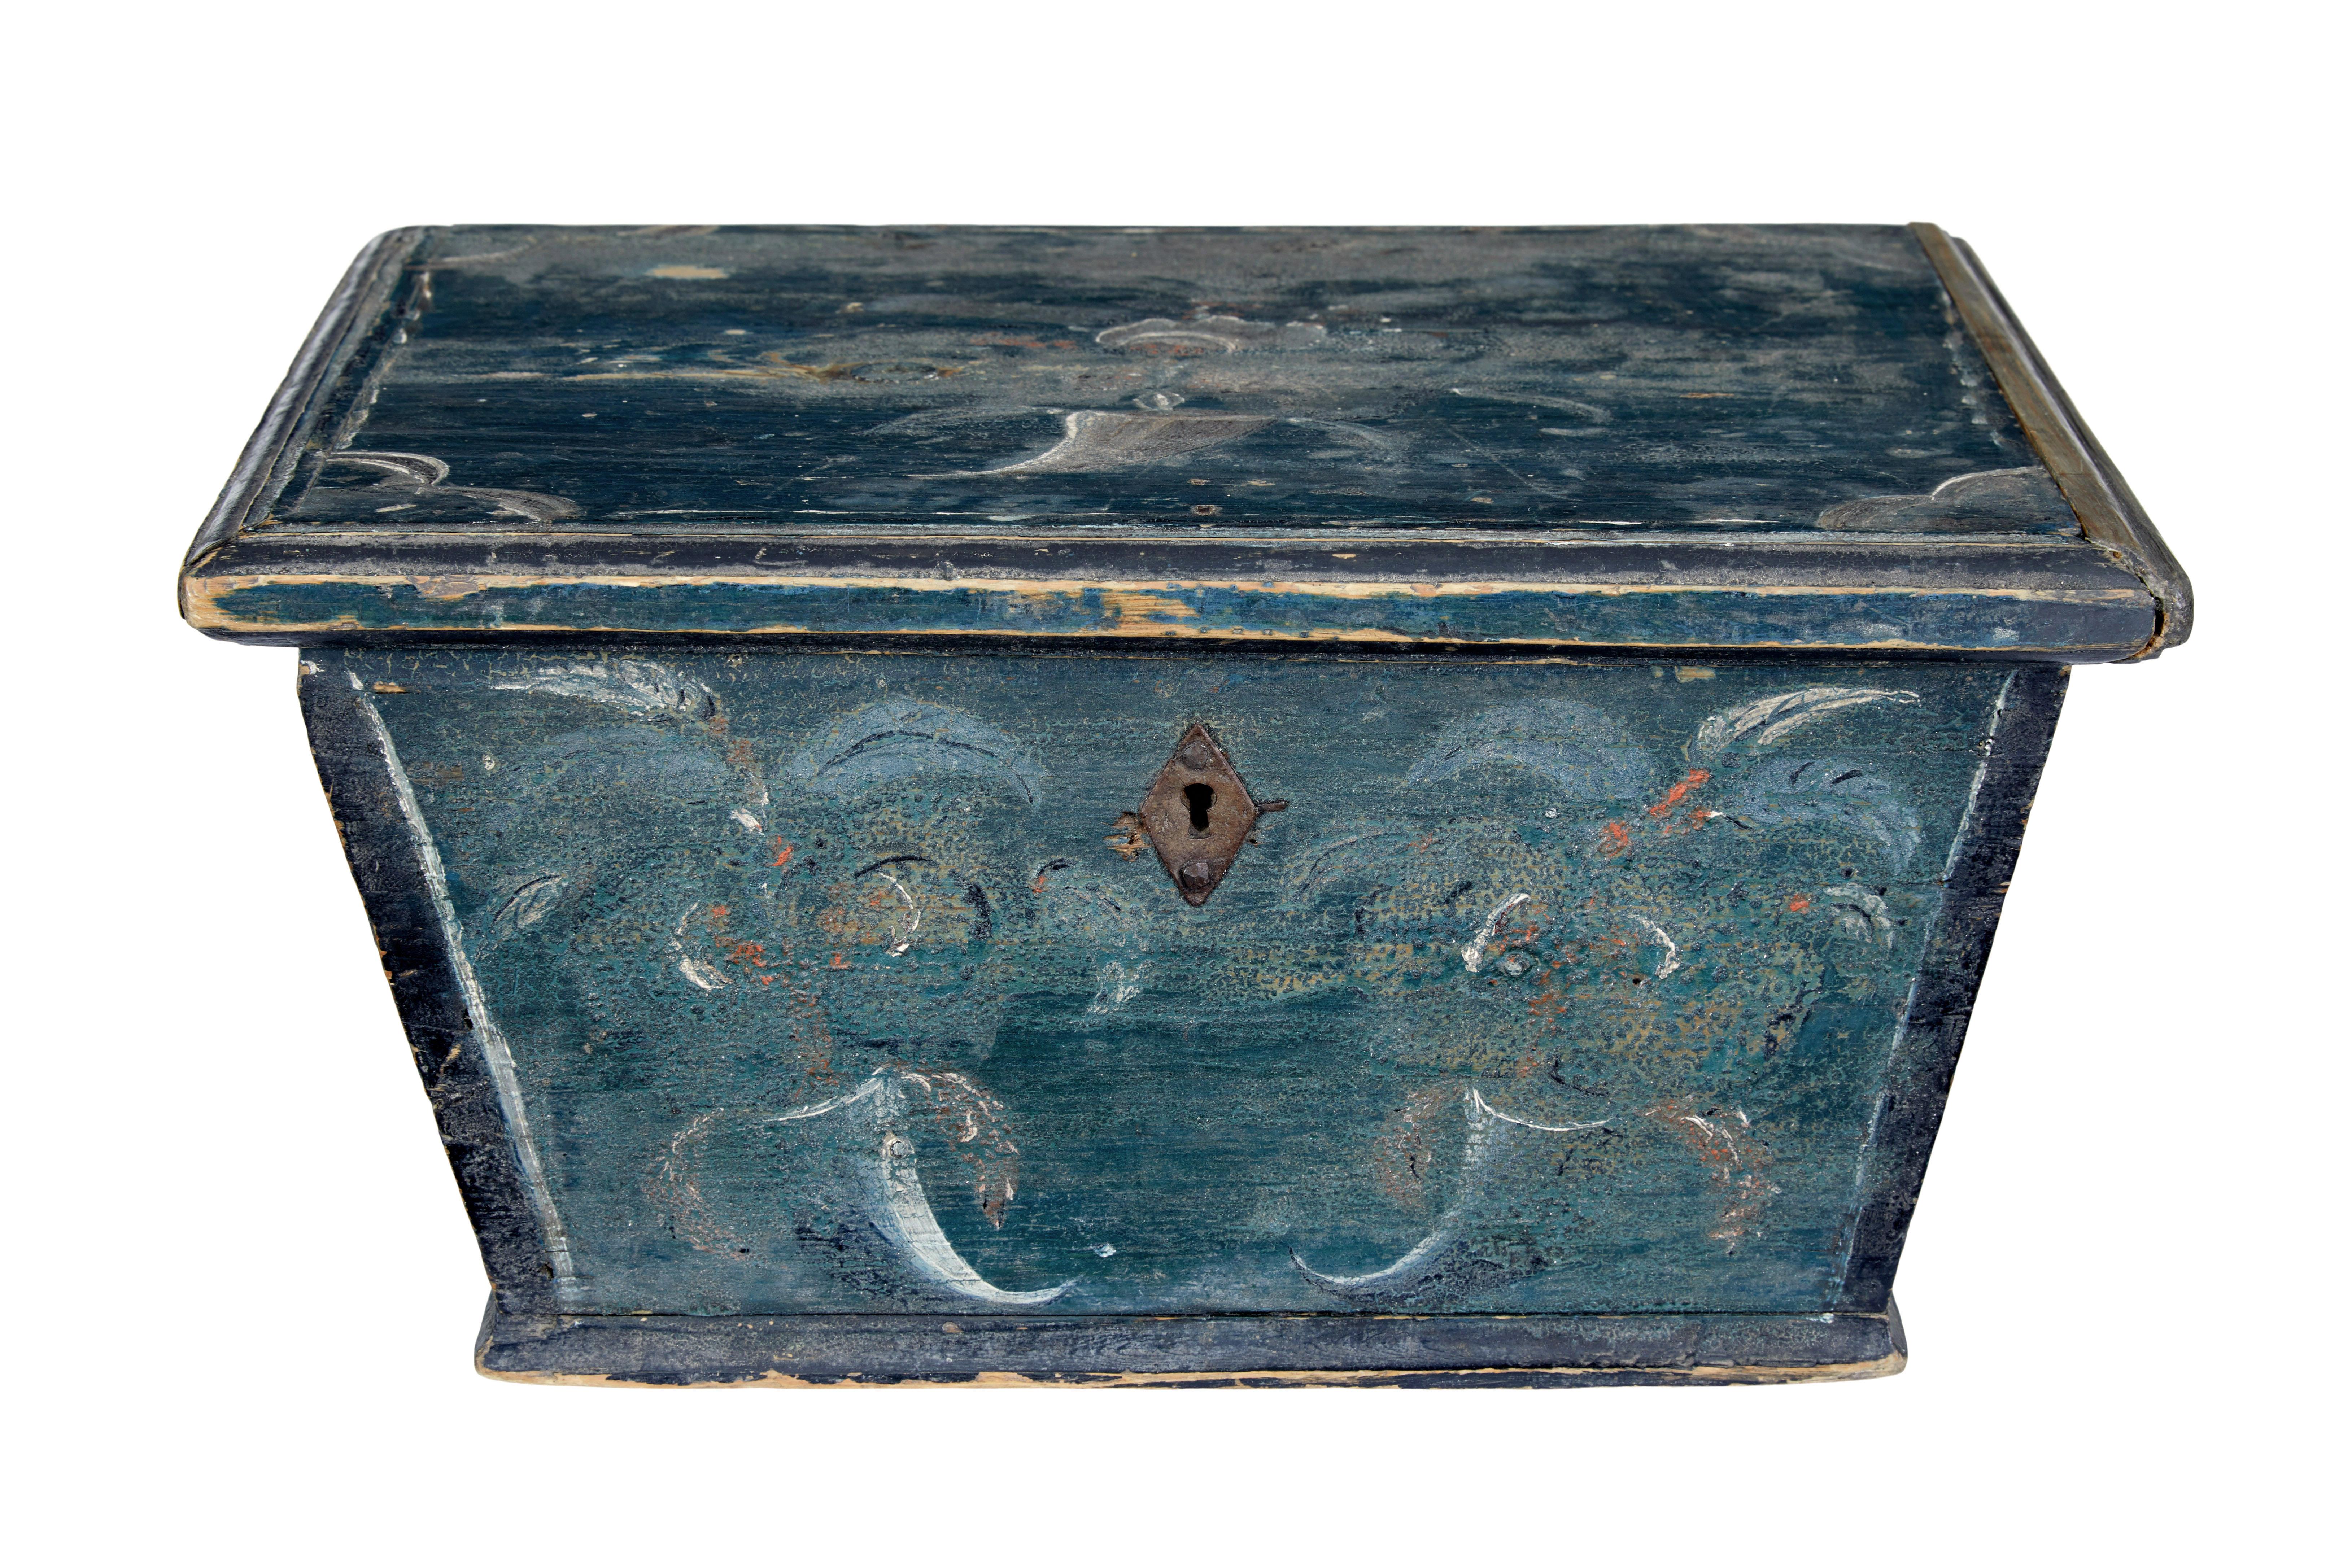 Small 19th century original painted sarcophagus box circa 1870.

Beautiful decorative box with original paint.   Sarcophagus shaped lidded box in original paint with traces of original hand painted floral decoration to each side.

Lid opens to